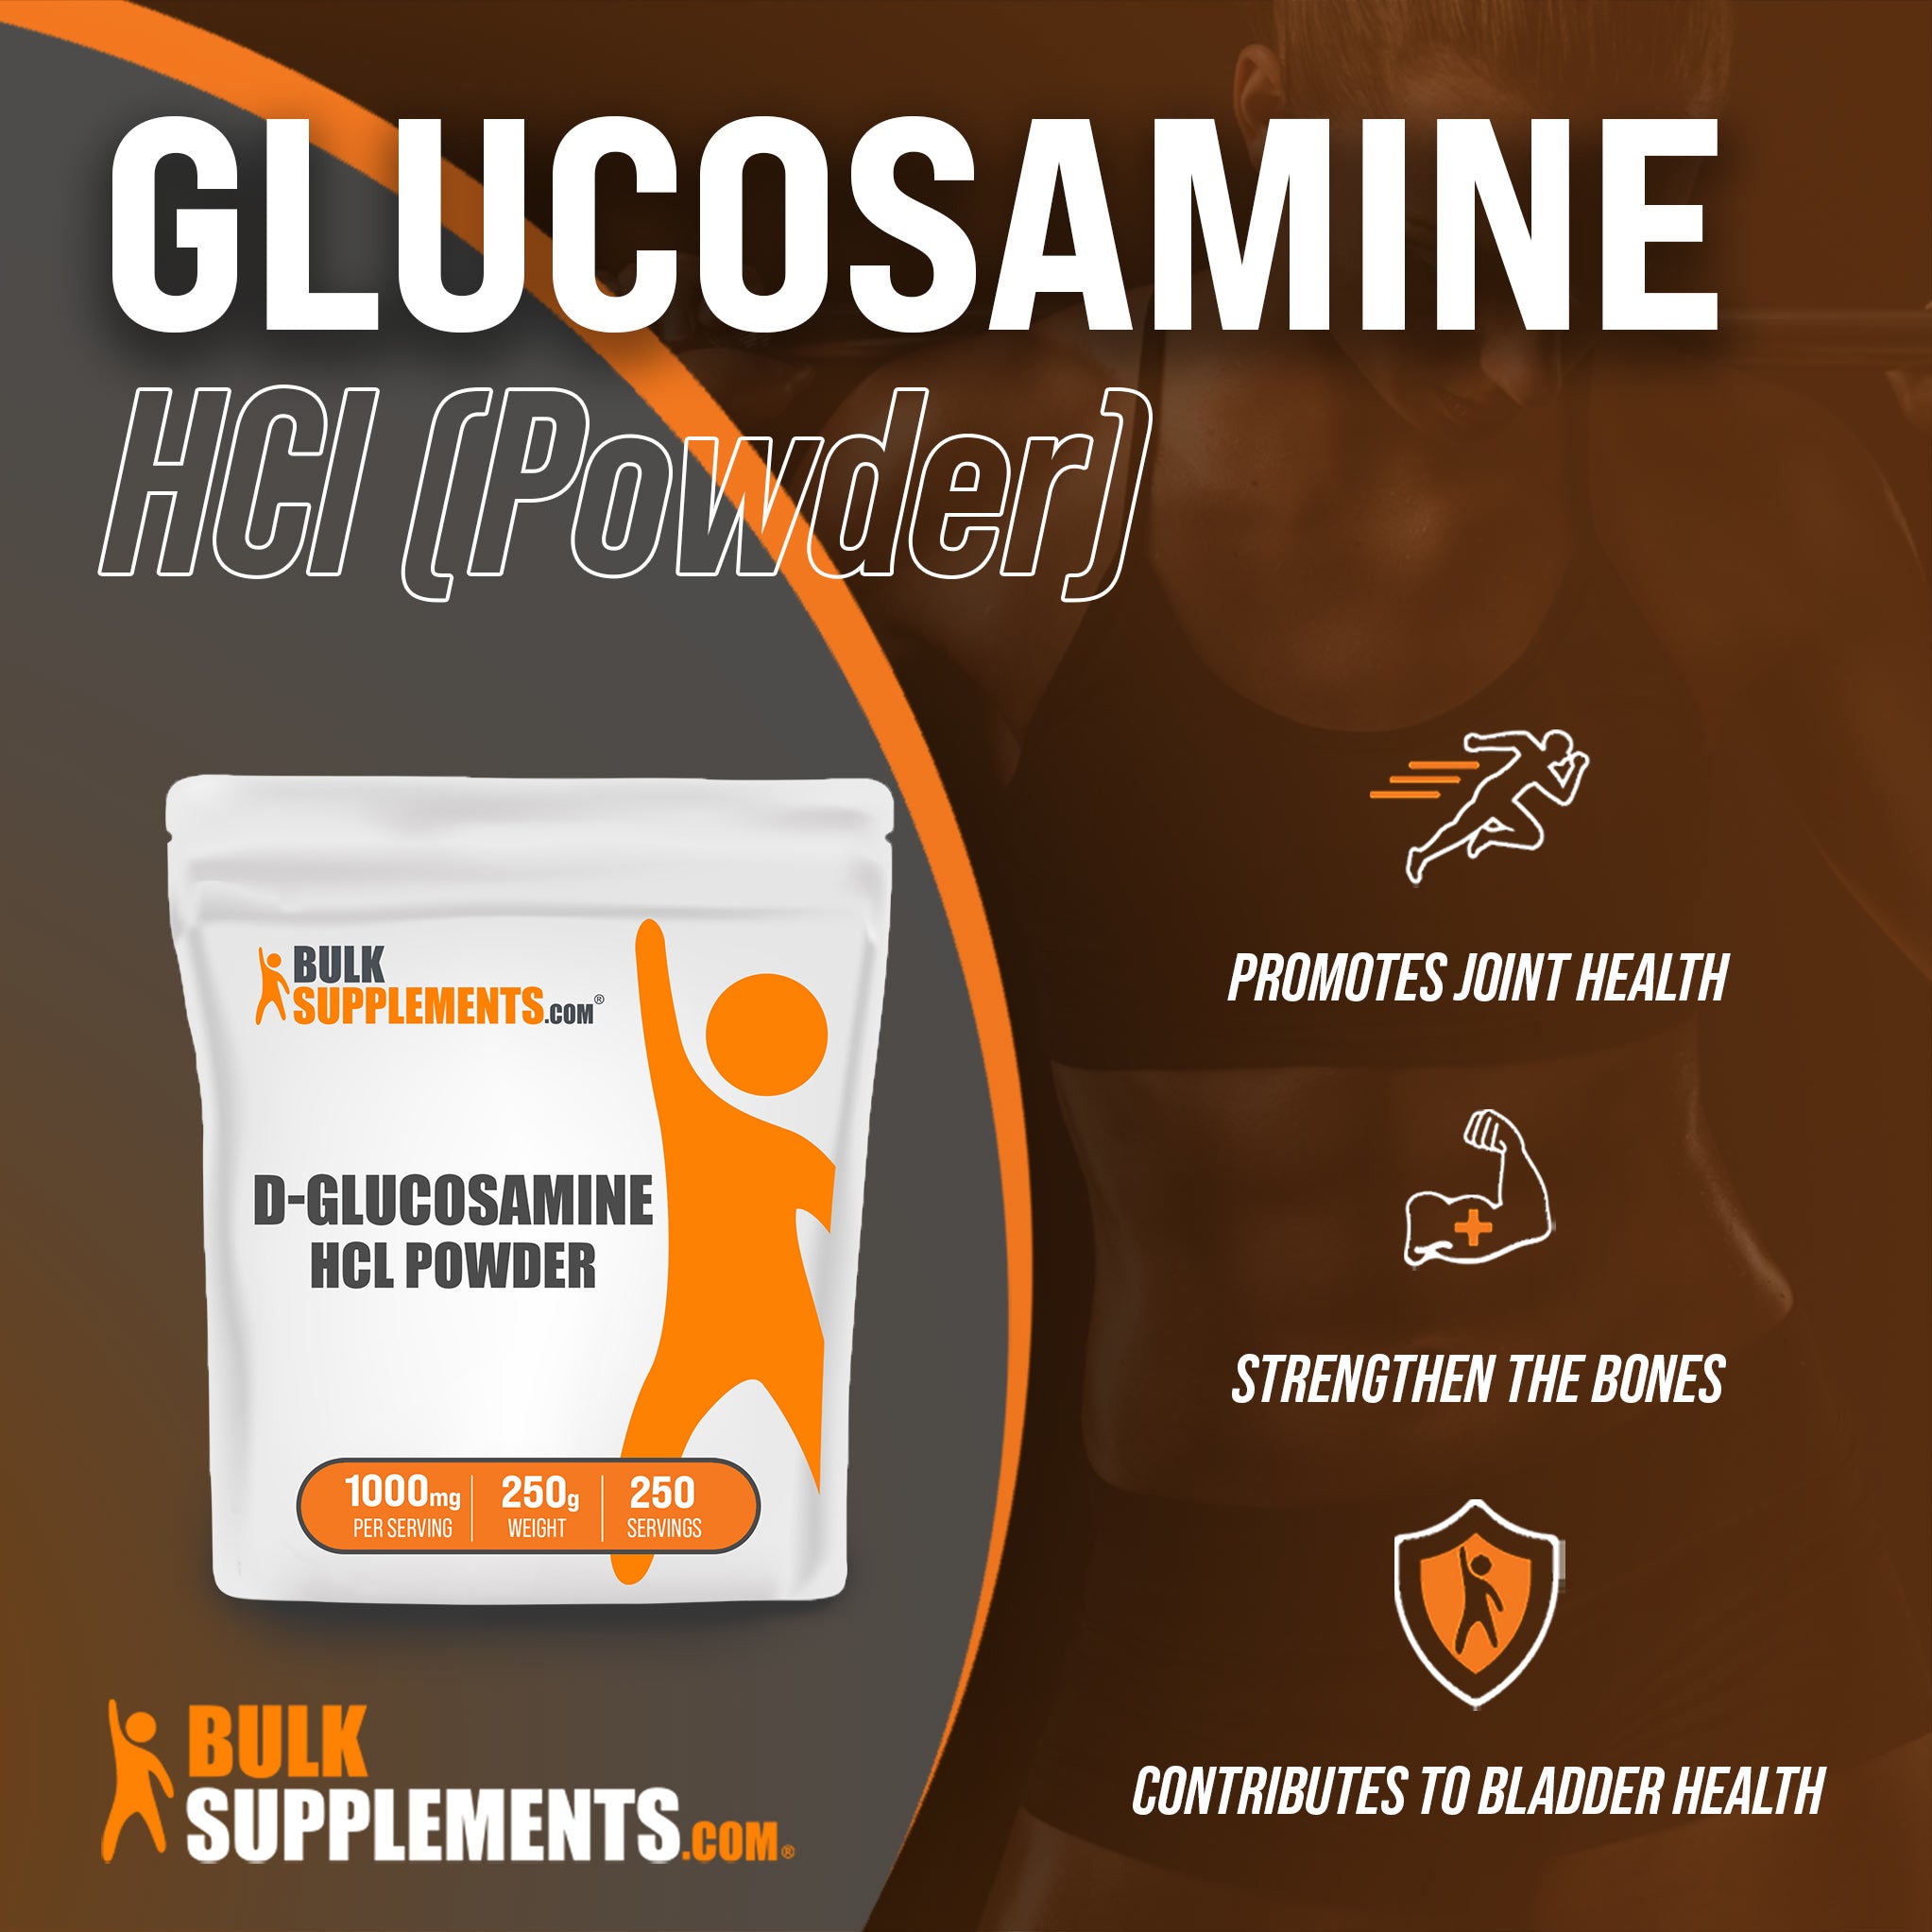 Benefits of Glucosamine HCl; promotes joint health, strengthen the bones, contributes to bladder health